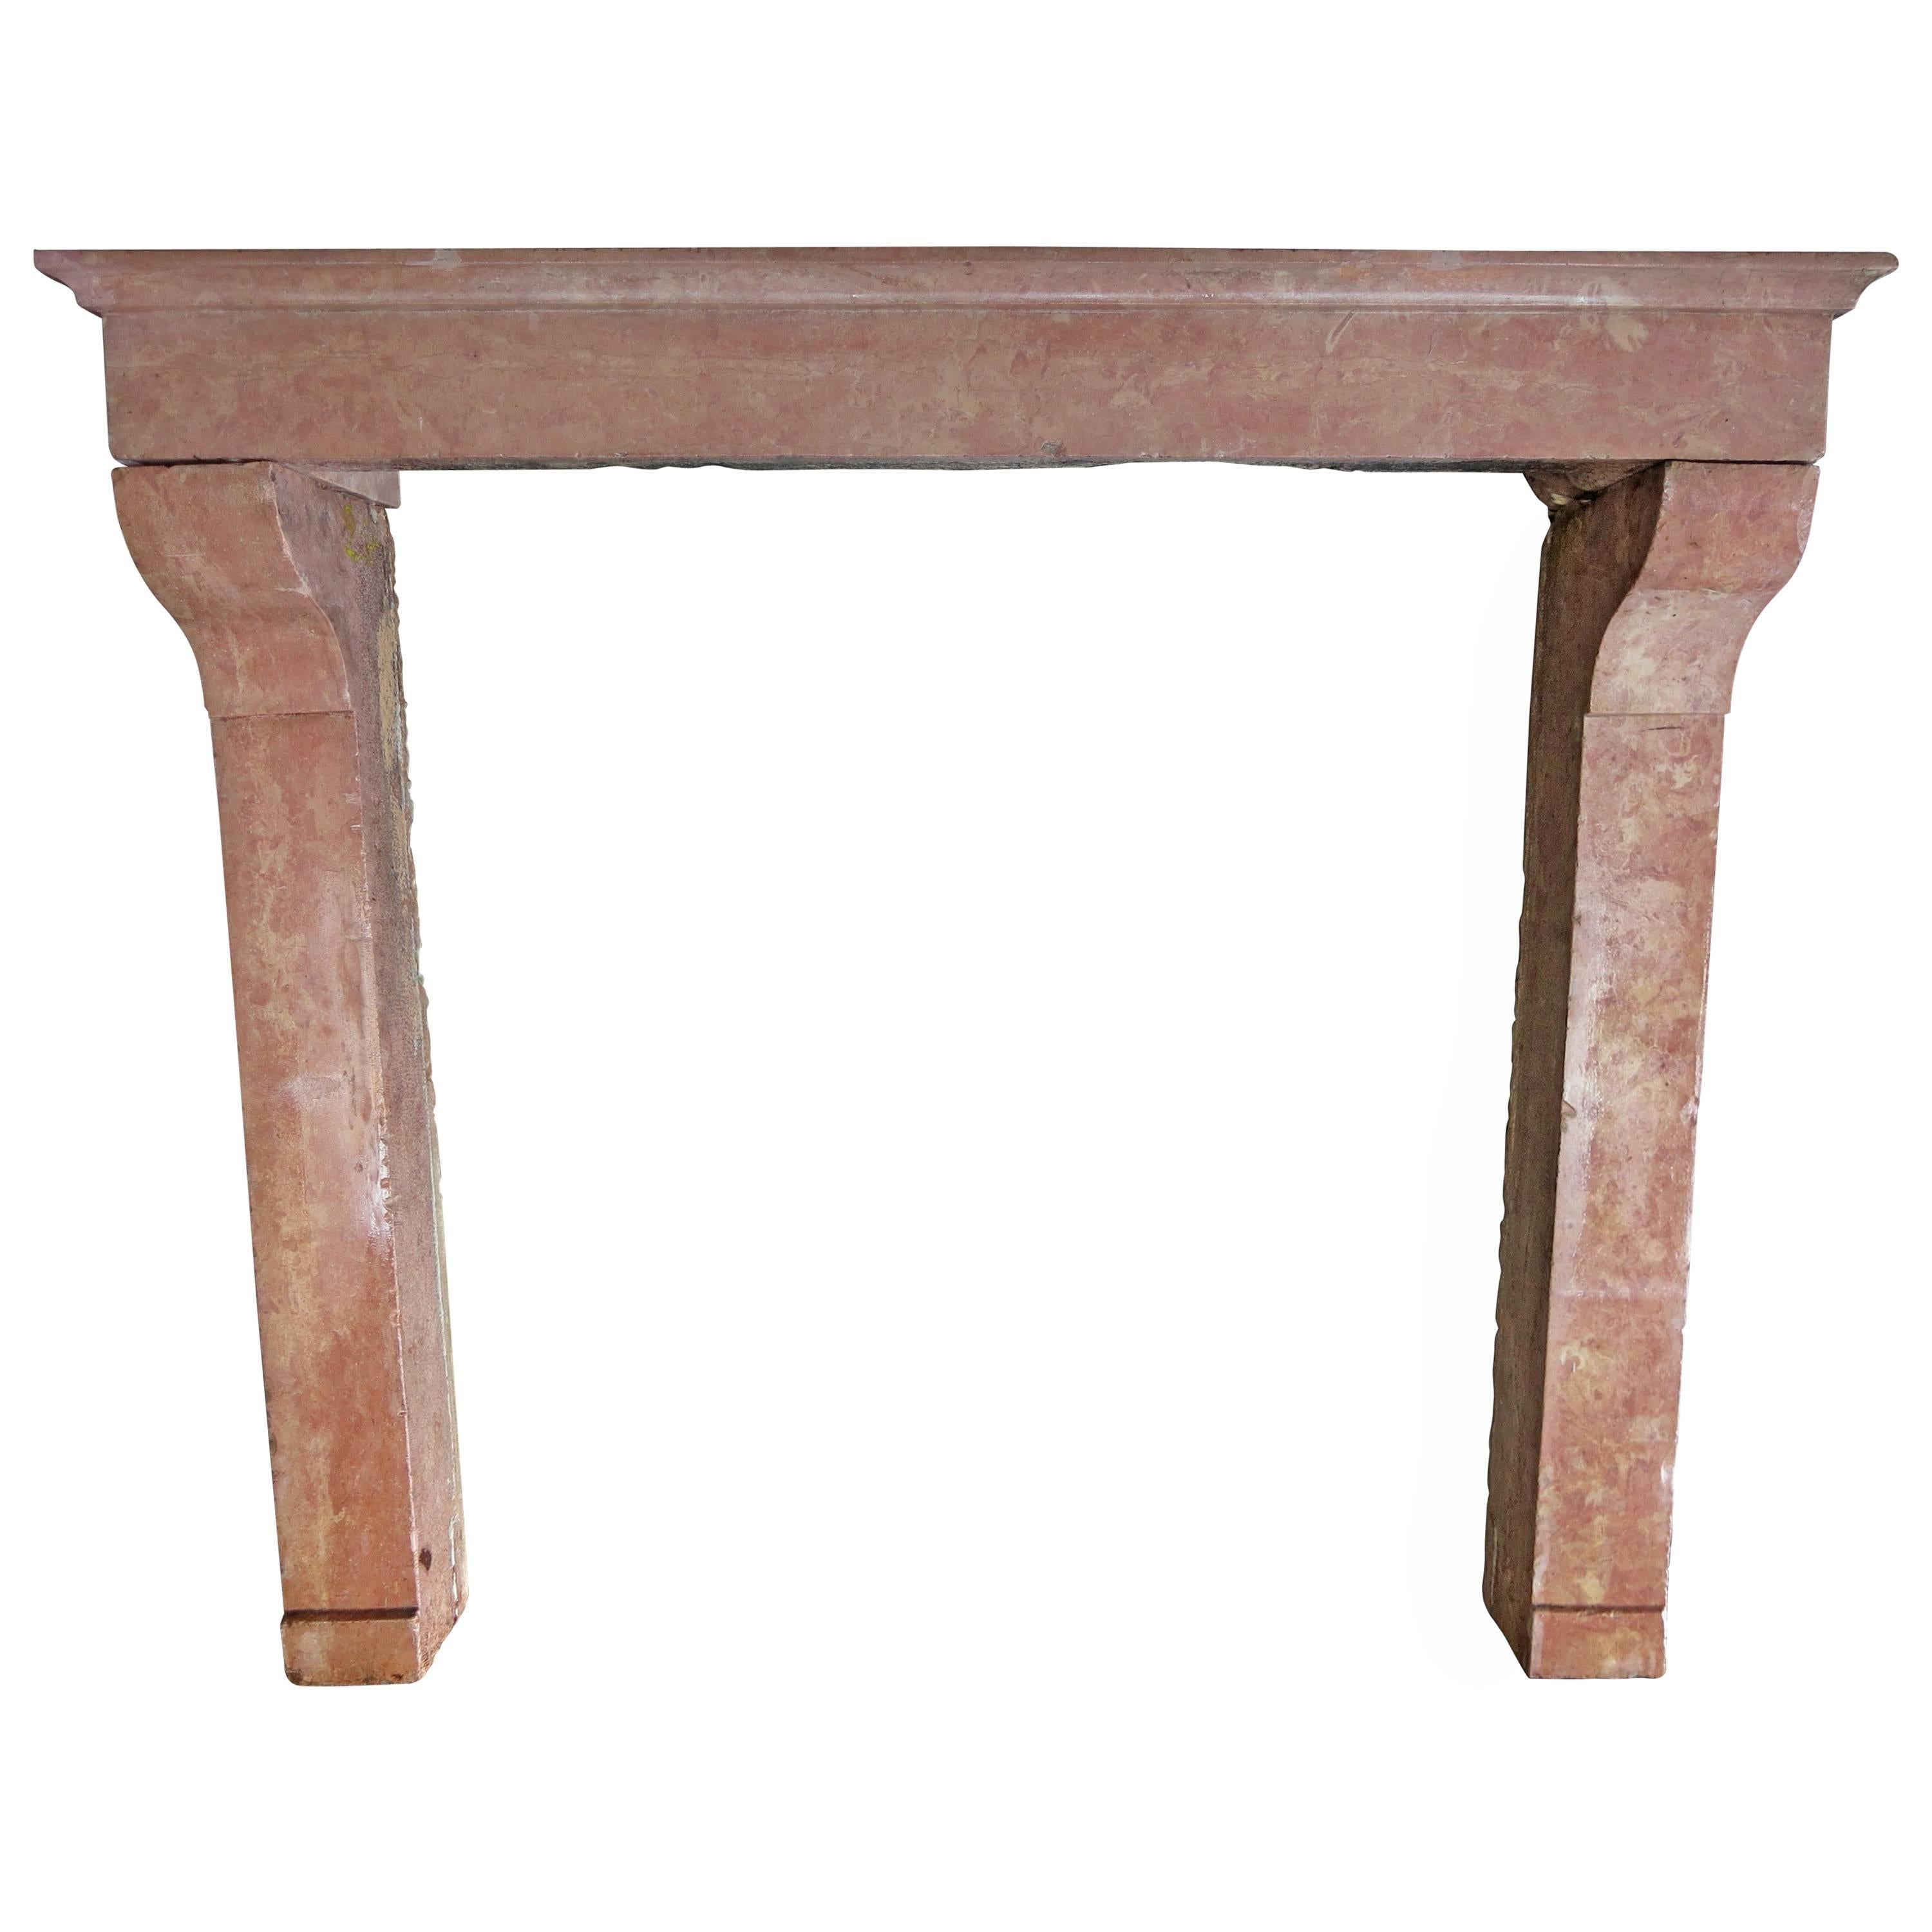 Original French Country Antique Fireplace Hard-Stone, circa 1800s, France For Sale